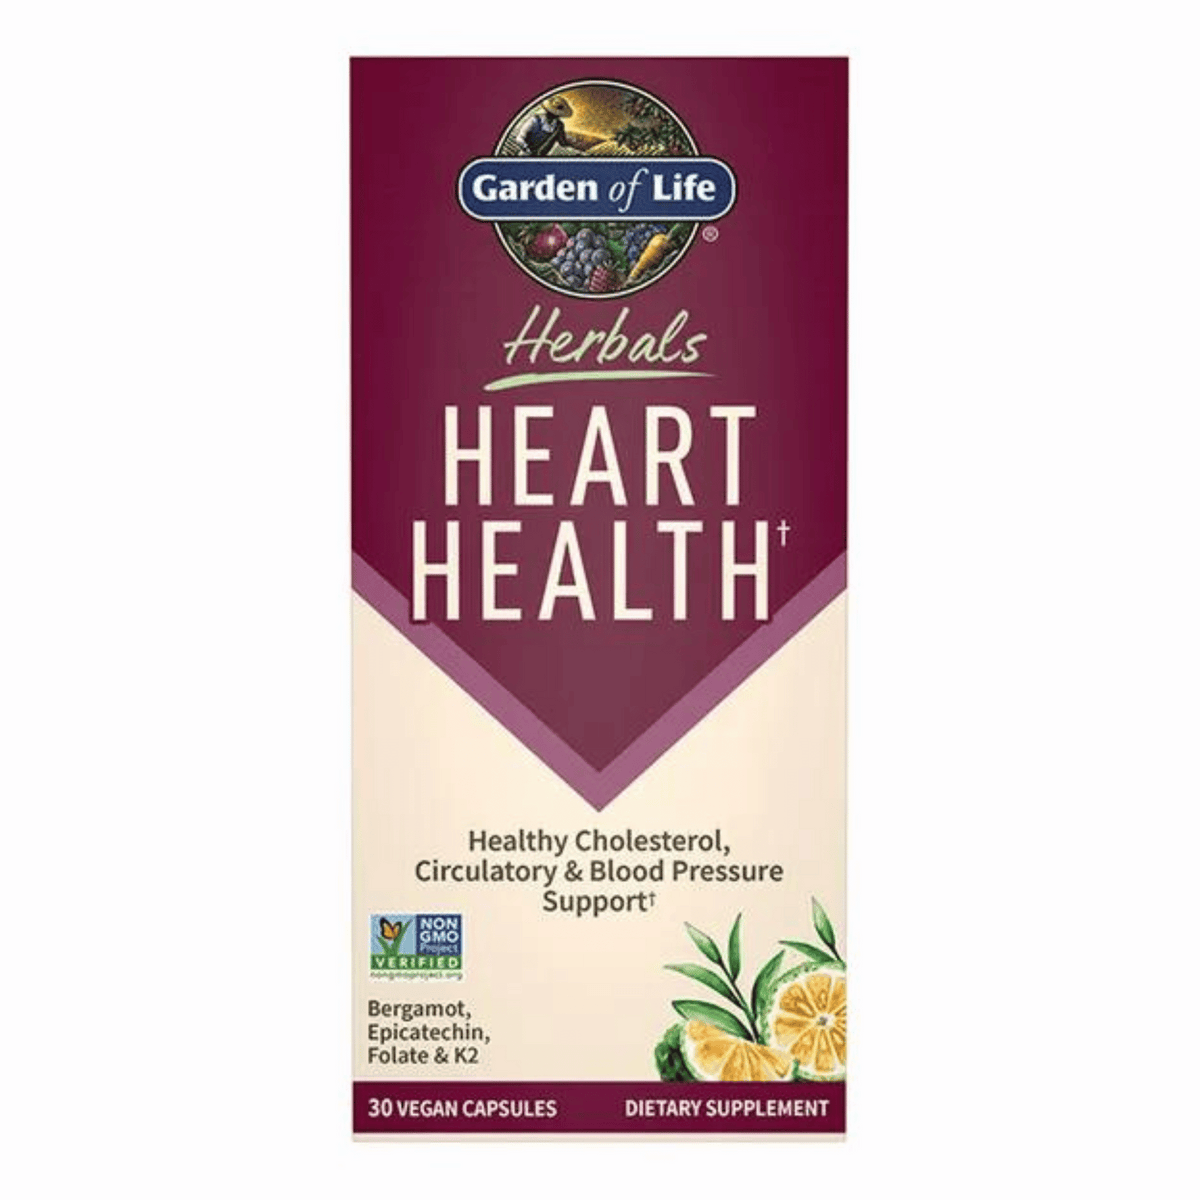 Primary Image of Heart Health Capsules